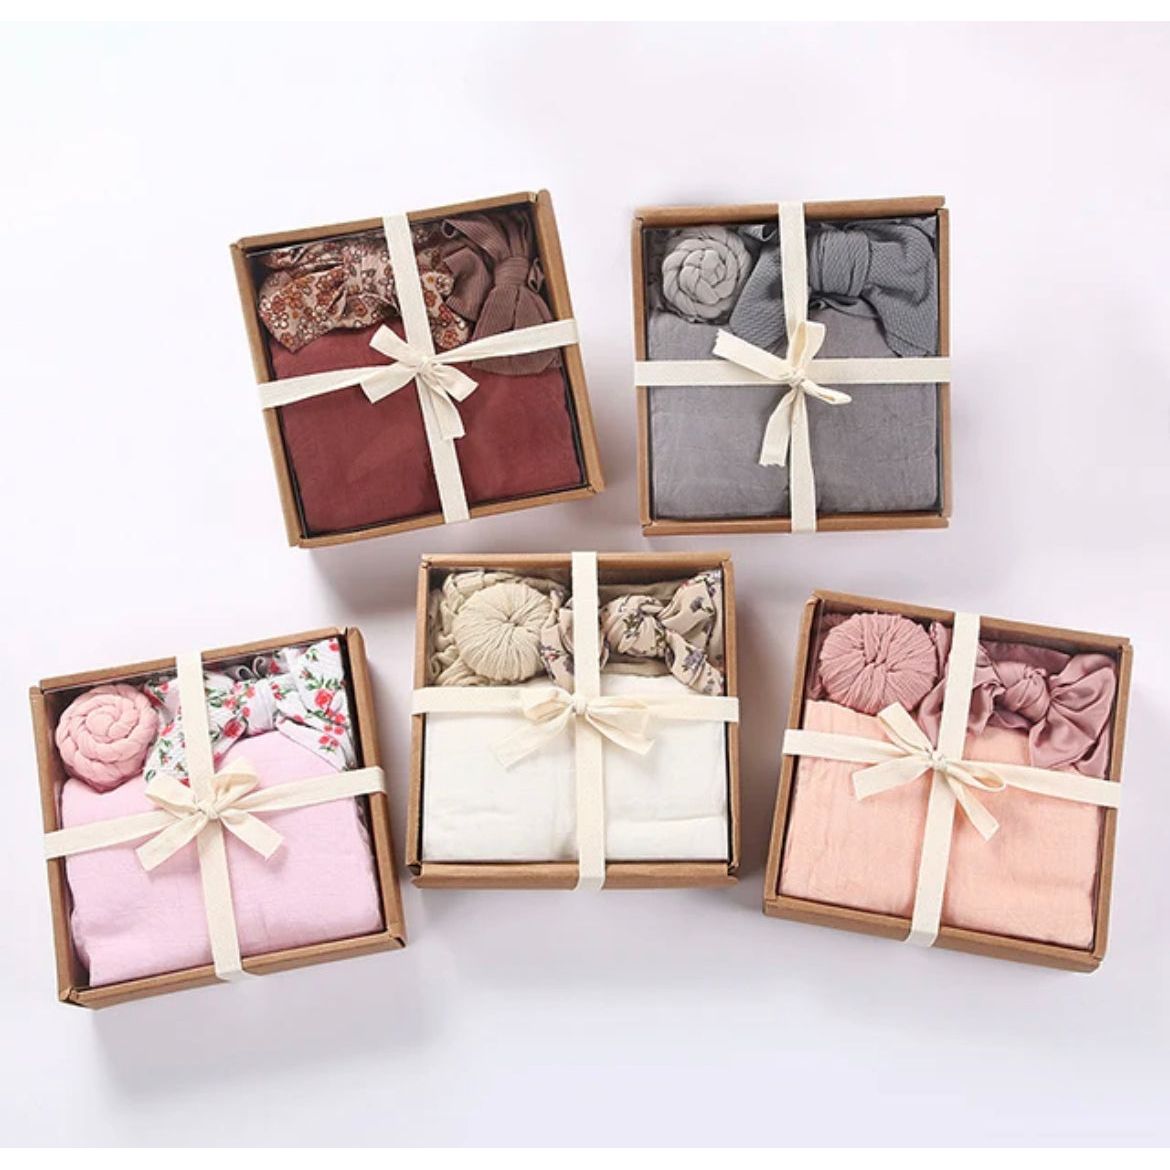 Pibi Infants Gift Set of 3 in a Box (Swaddle, Bowknot Hairband, Turban) Dp060 Assorted Age- Newborn to 12 Months